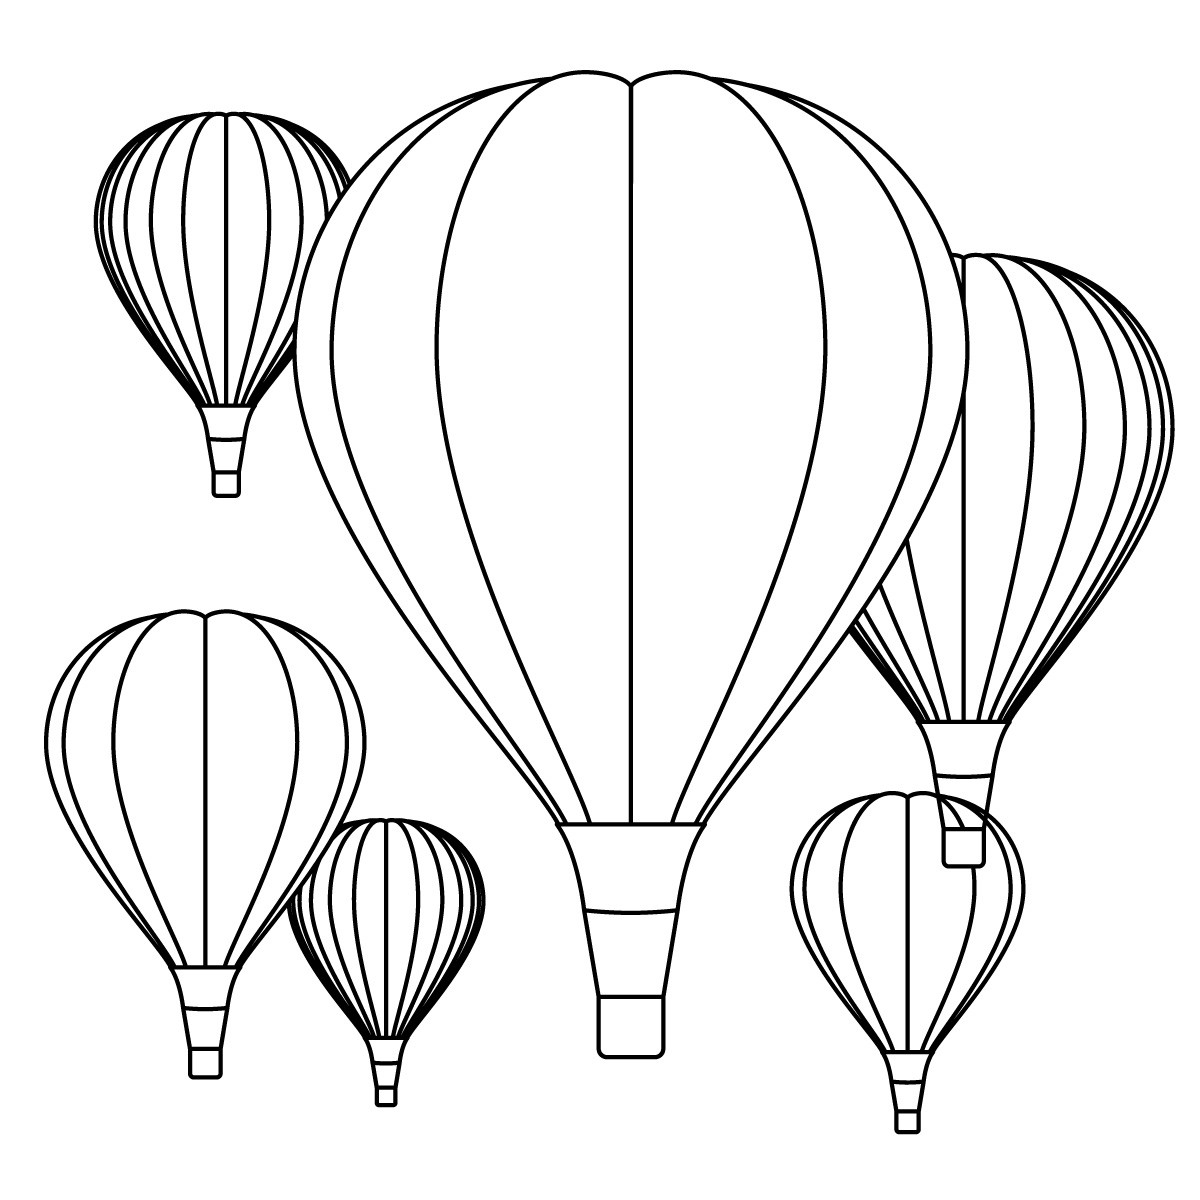 Coloring pages hot air balloons coloring page